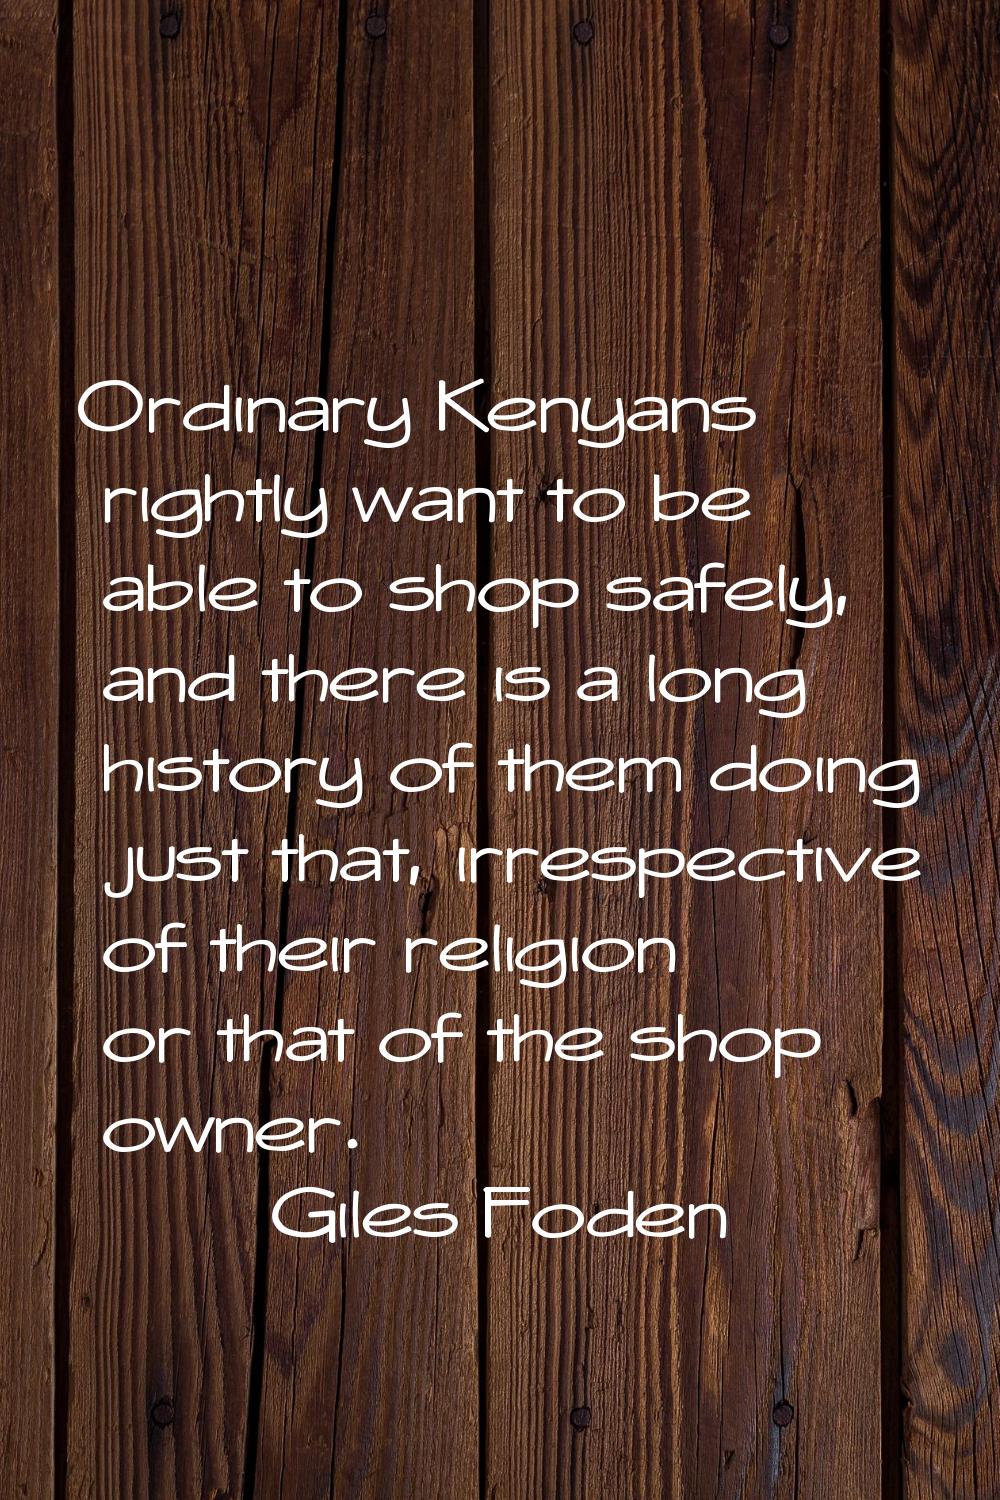 Ordinary Kenyans rightly want to be able to shop safely, and there is a long history of them doing 